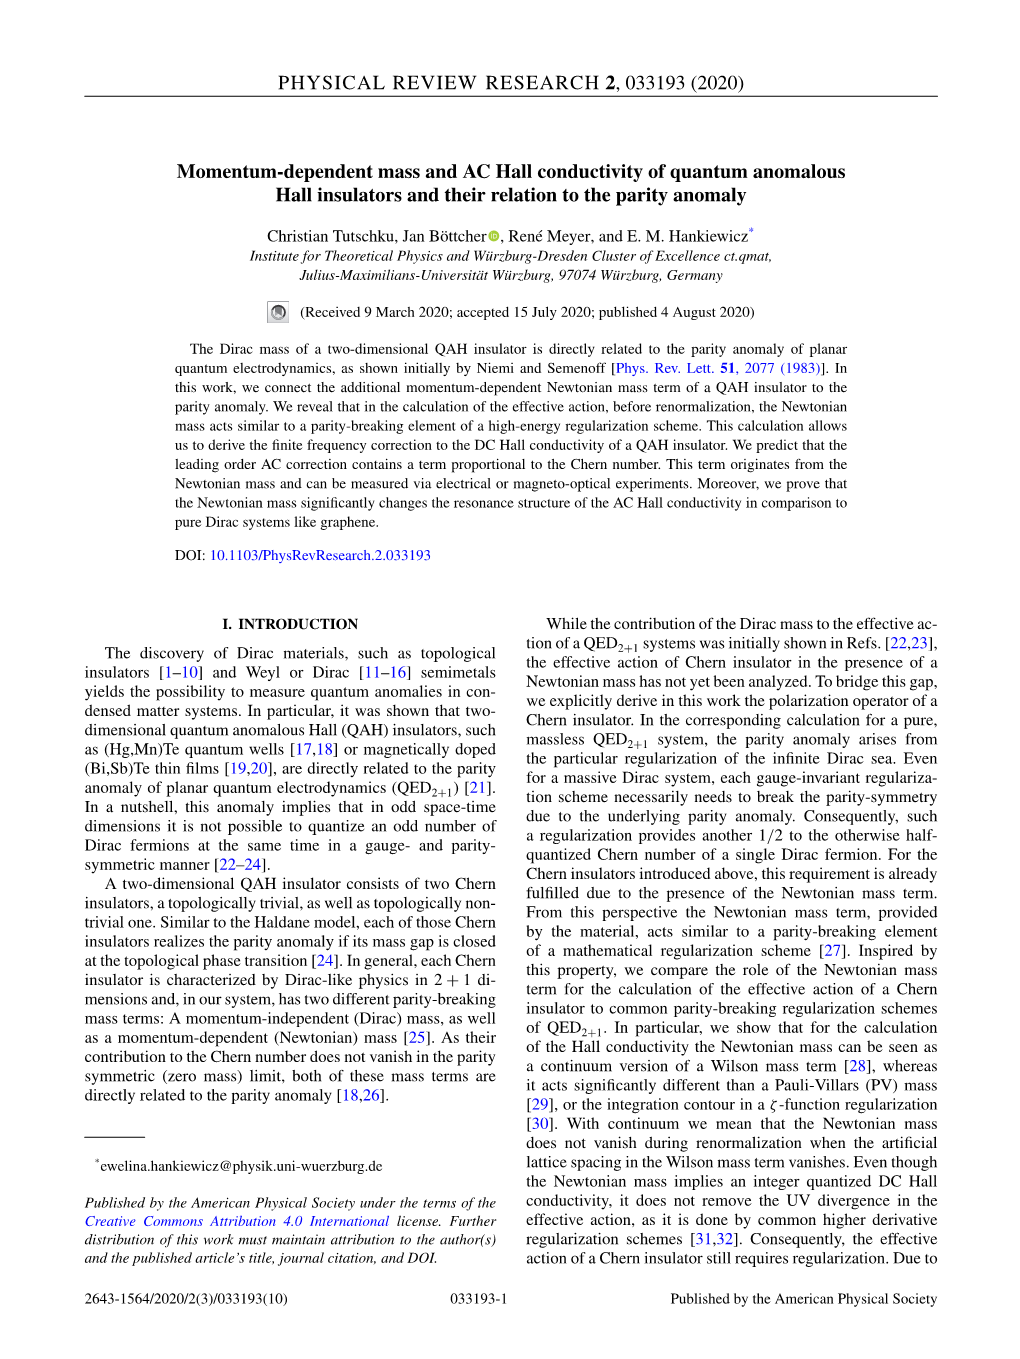 Momentum-Dependent Mass and AC Hall Conductivity of Quantum Anomalous Hall Insulators and Their Relation to the Parity Anomaly